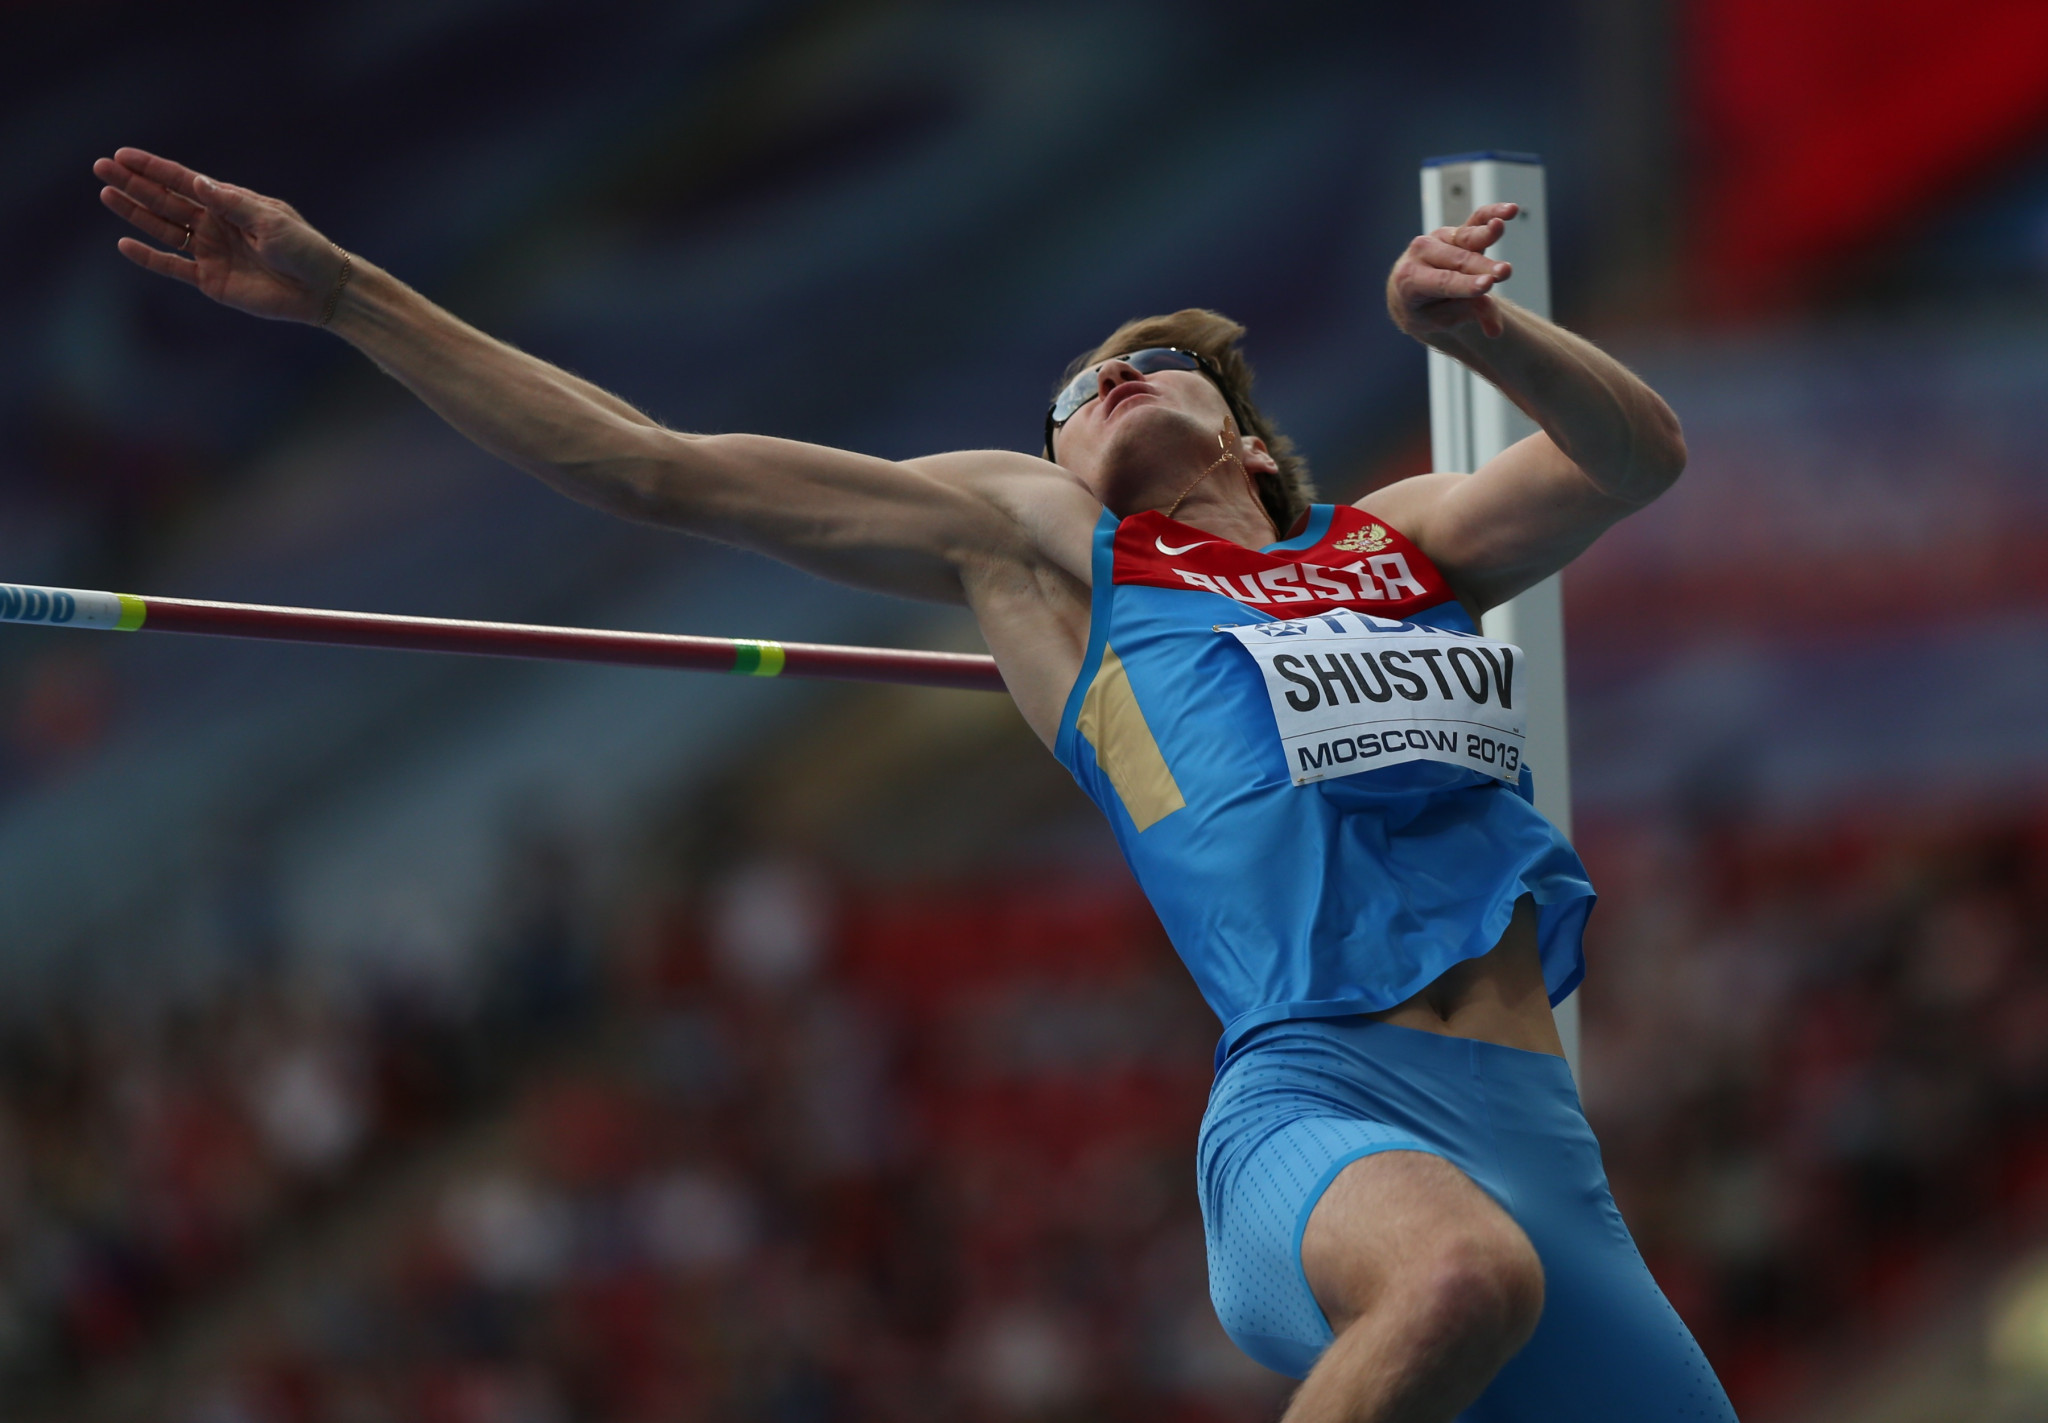 Among the results annulled after the Court of Arbitration for Sport upheld Alexander Shustov's four-year doping ban was his seventh place finish at the 2013 World Championships in Moscow ©Getty Images